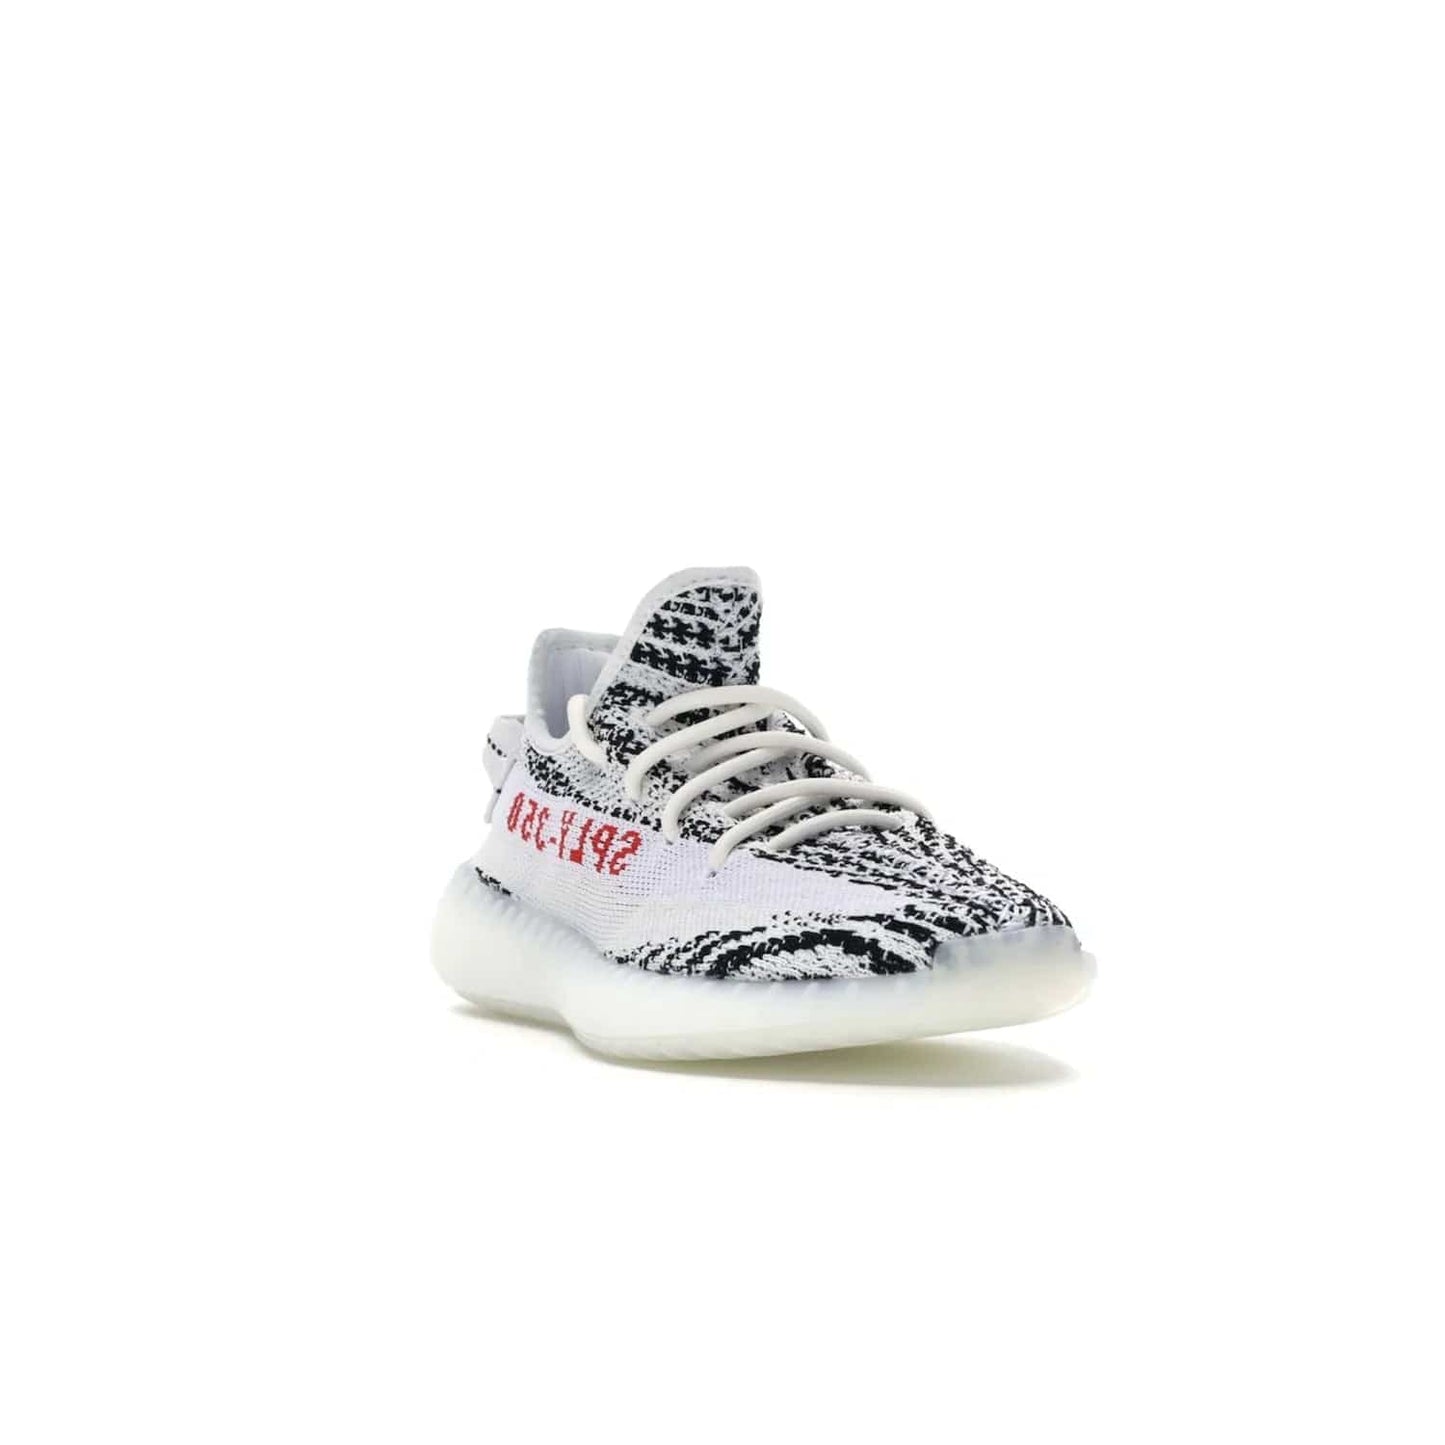 adidas Yeezy Boost 350 V2 Zebra - Image 7 - Only at www.BallersClubKickz.com - #
Score the iconic adidas Yeezy Boost 350 V2 Zebra for a fashionable addition to your street-style. Featuring a Primeknit upper and Boost sole, you'll look great and feel comfortable with every step.